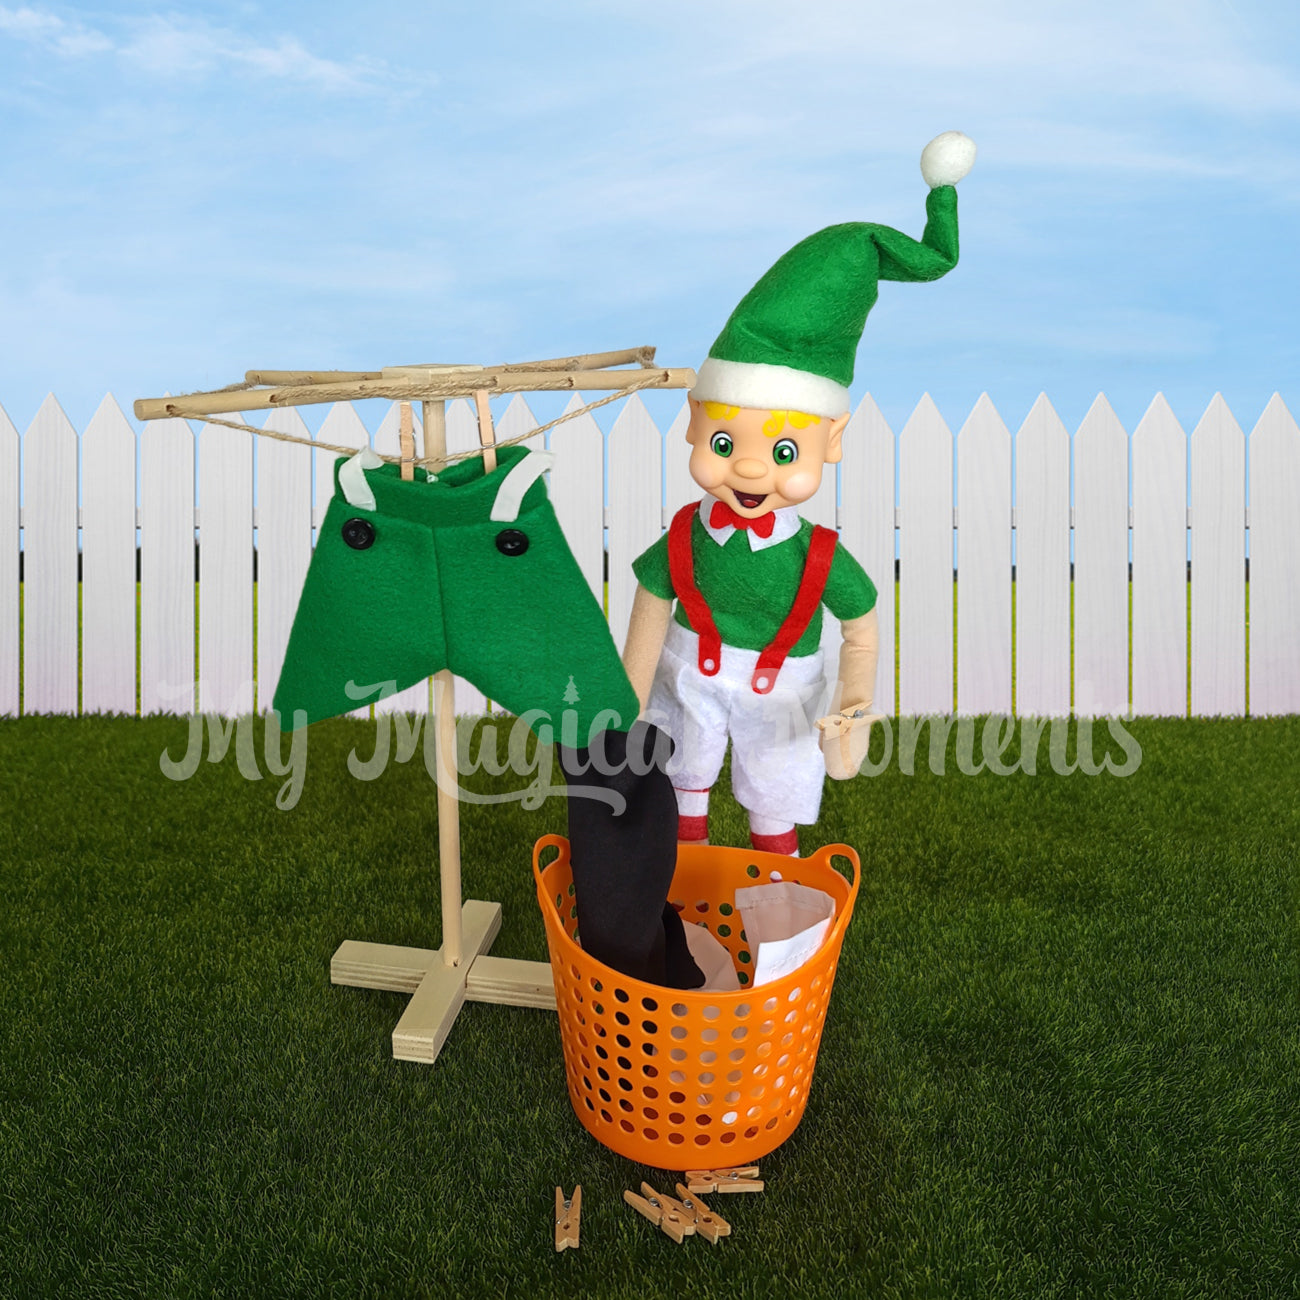 Elf hanging up washing on a miniature clothesline